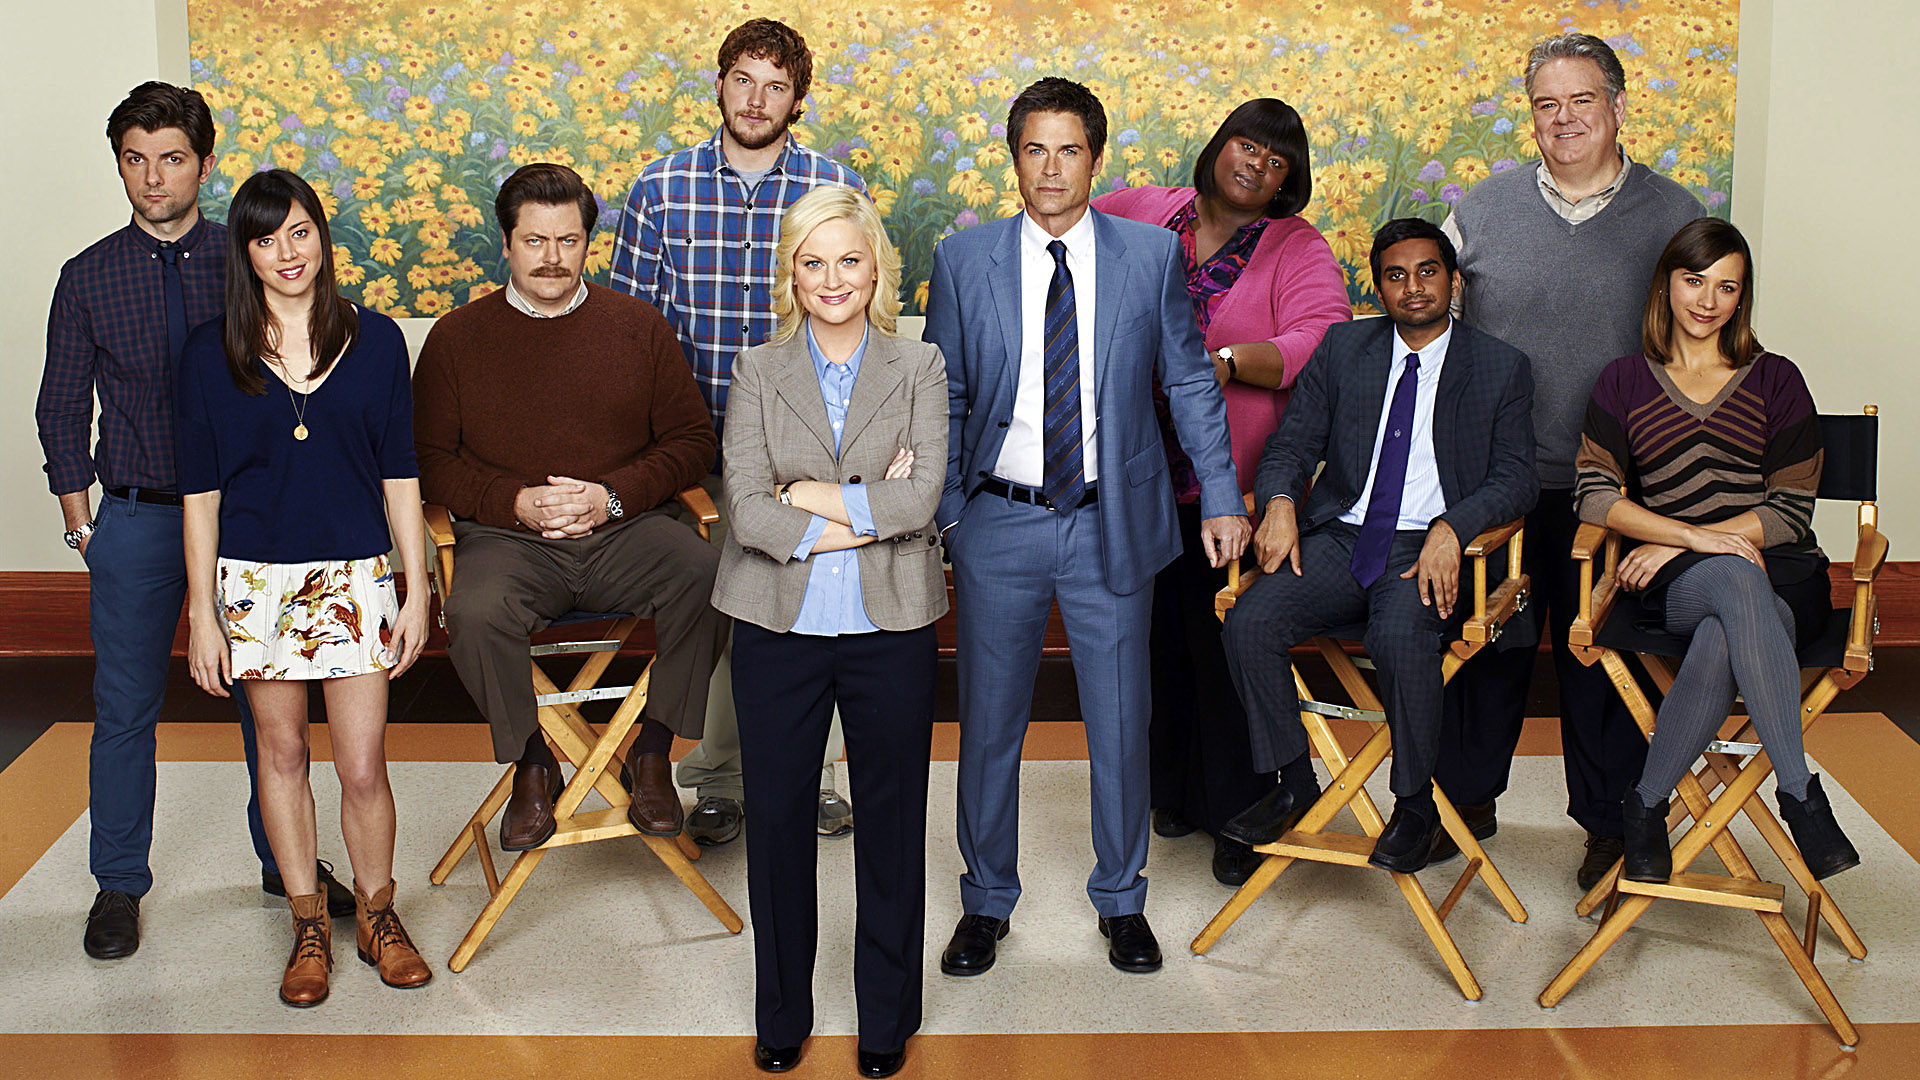 Images of Parks And Recreation | 1920x1080